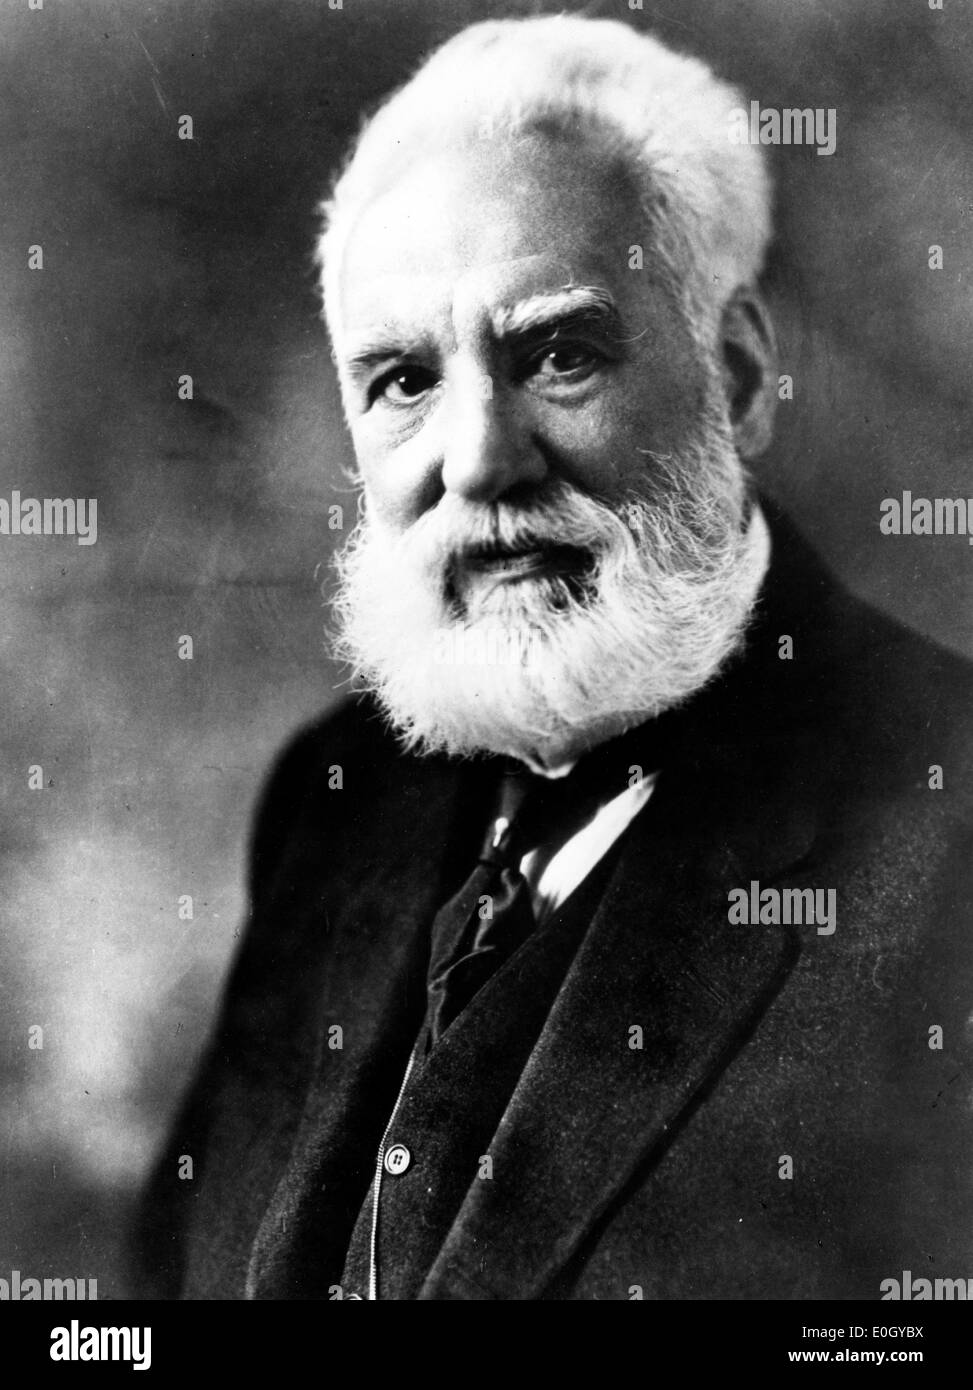 Portrait of the inventor of the telephone, Alexander Graham Bell Stock Photo